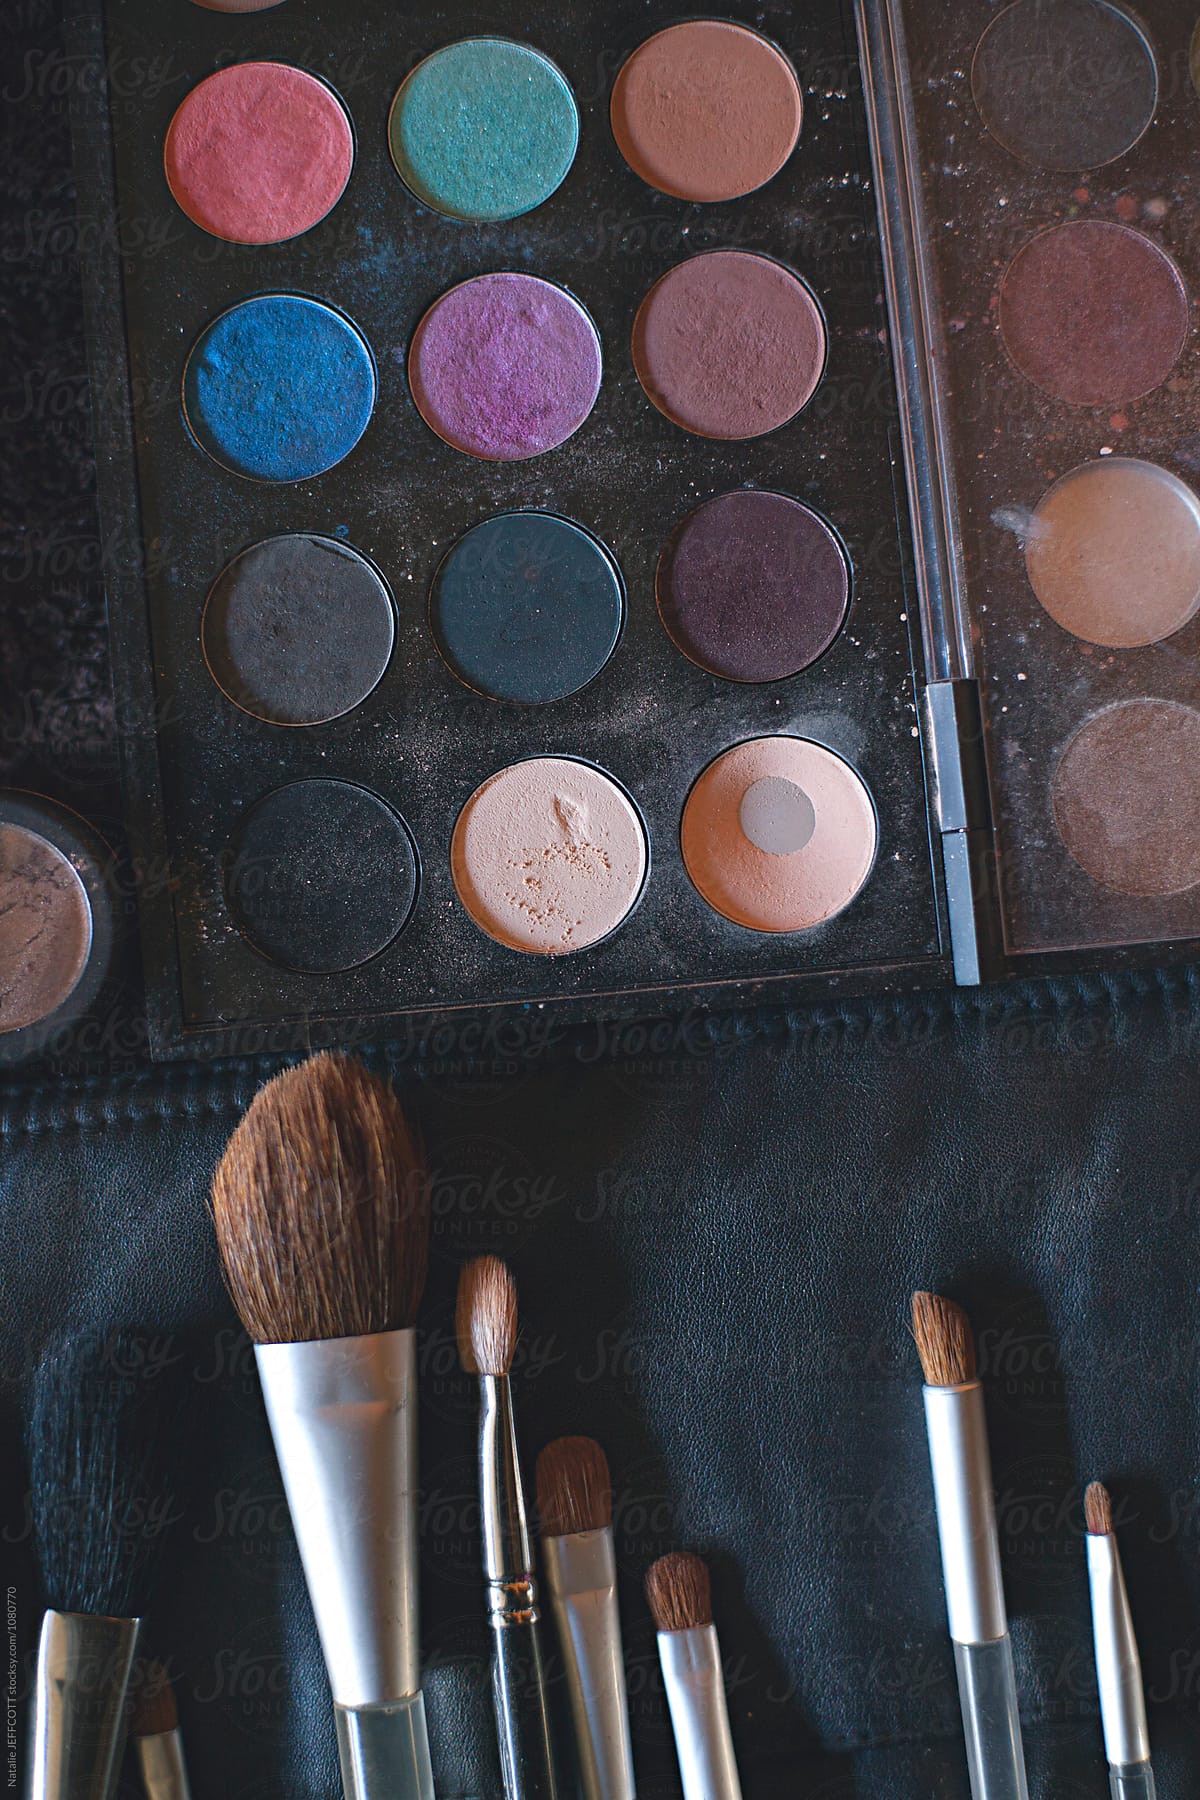 A palette of colourful eye shadows and brushes